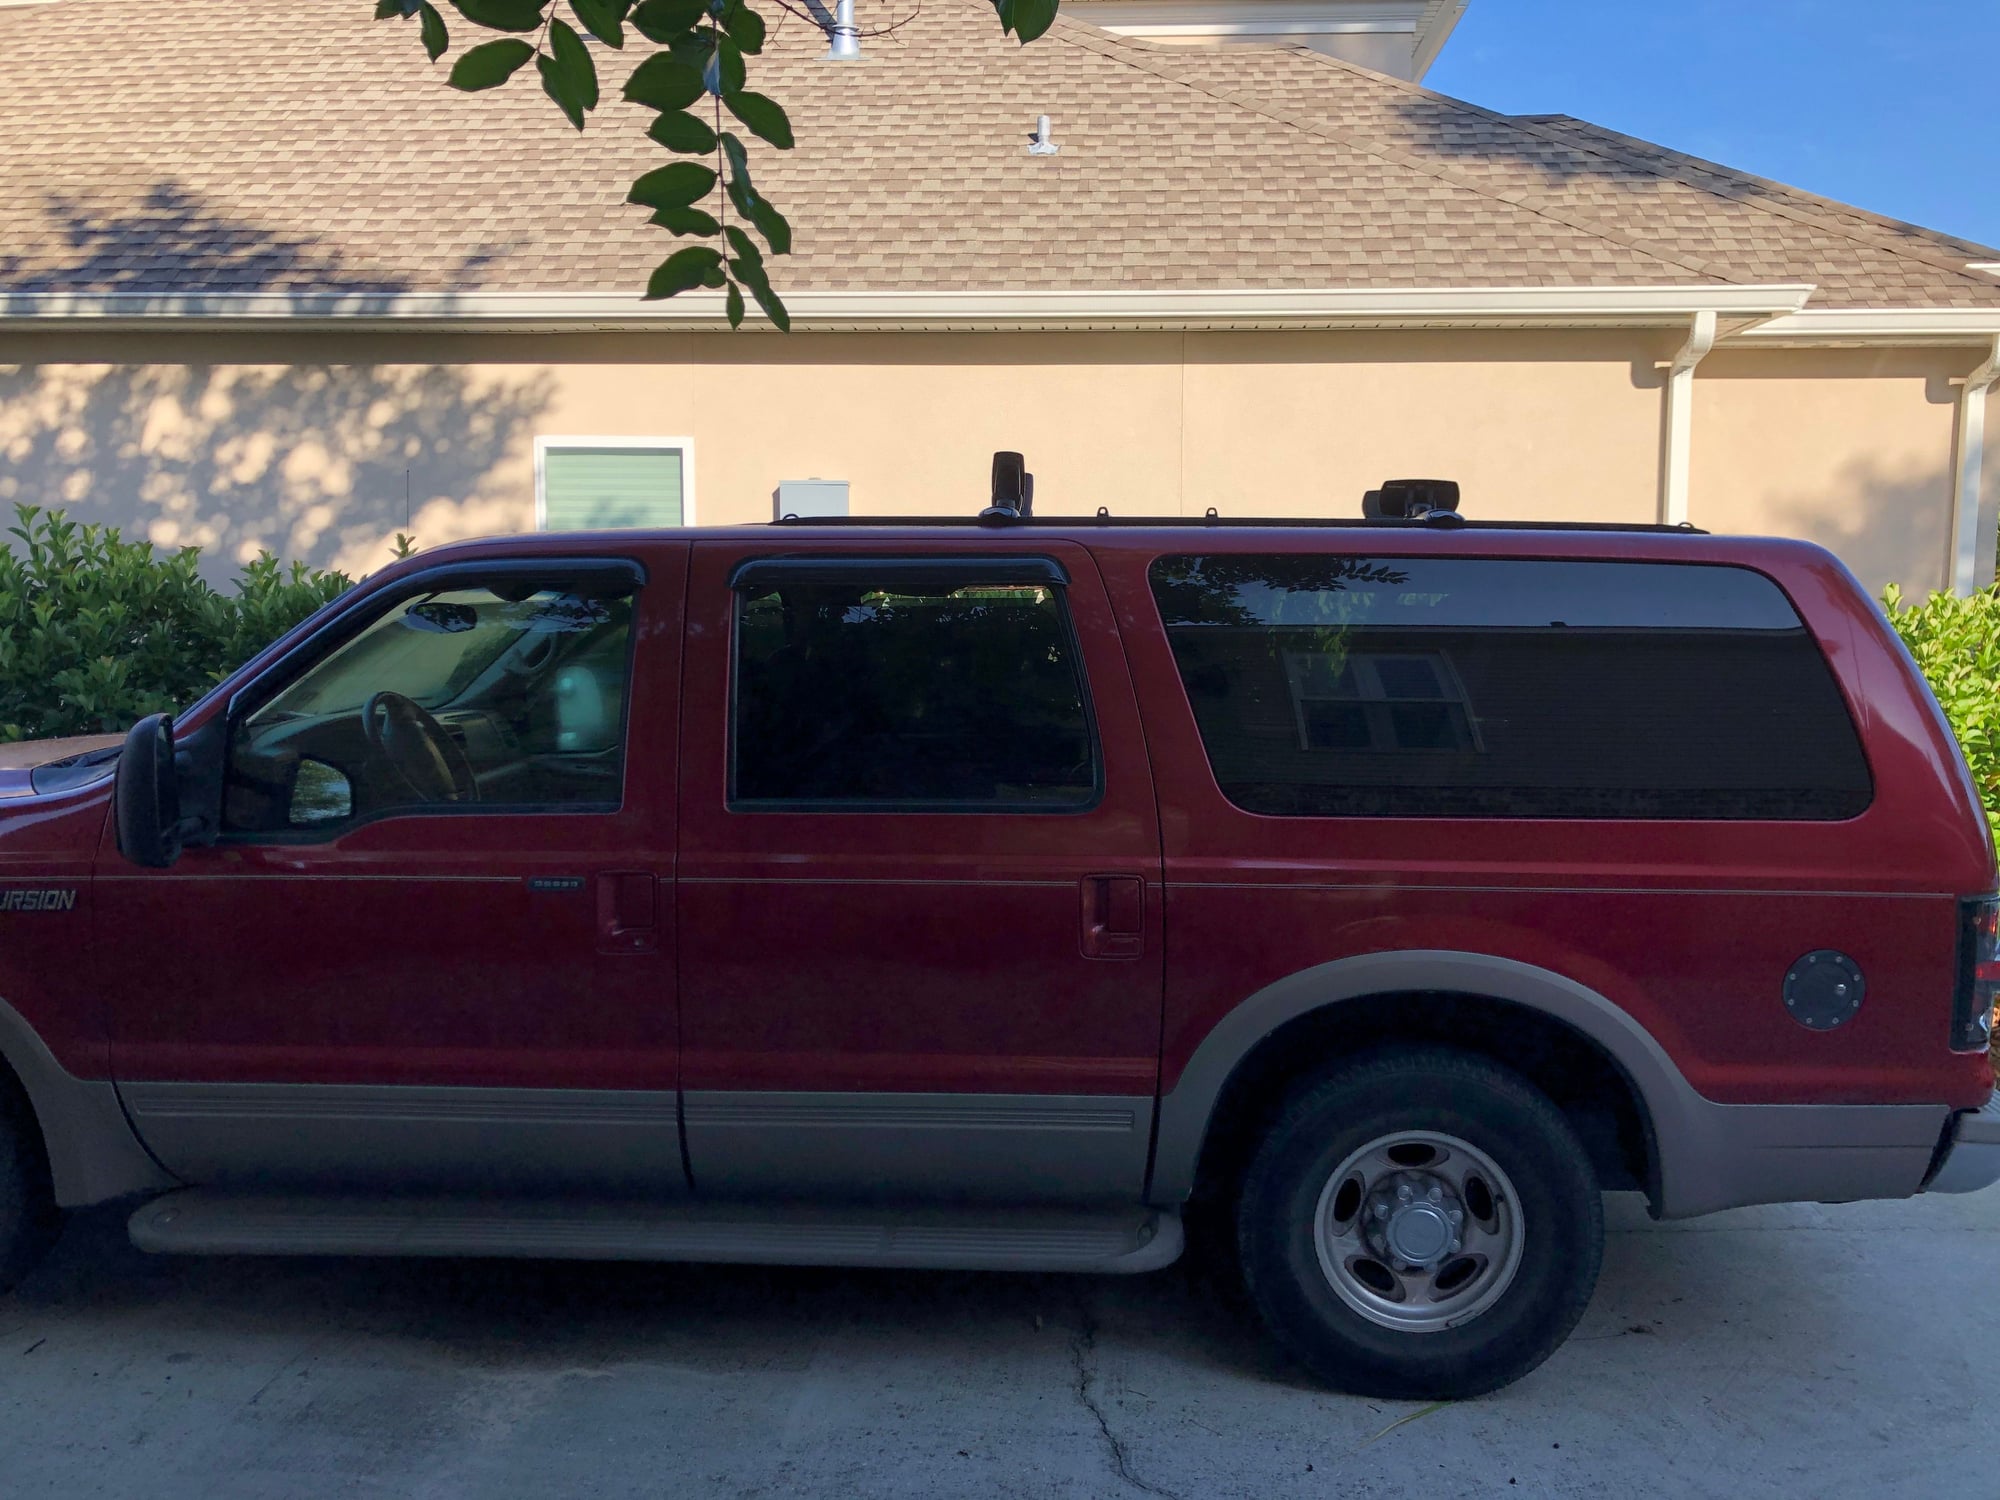 2001 Ford Excursion - 2001 Ford Excursion Limited 7.3L - Used - VIN 1FMNU42F11EA71212 - 208,000 Miles - 8 cyl - 2WD - Automatic - SUV - Red - Mandeville, LA 70471, United States